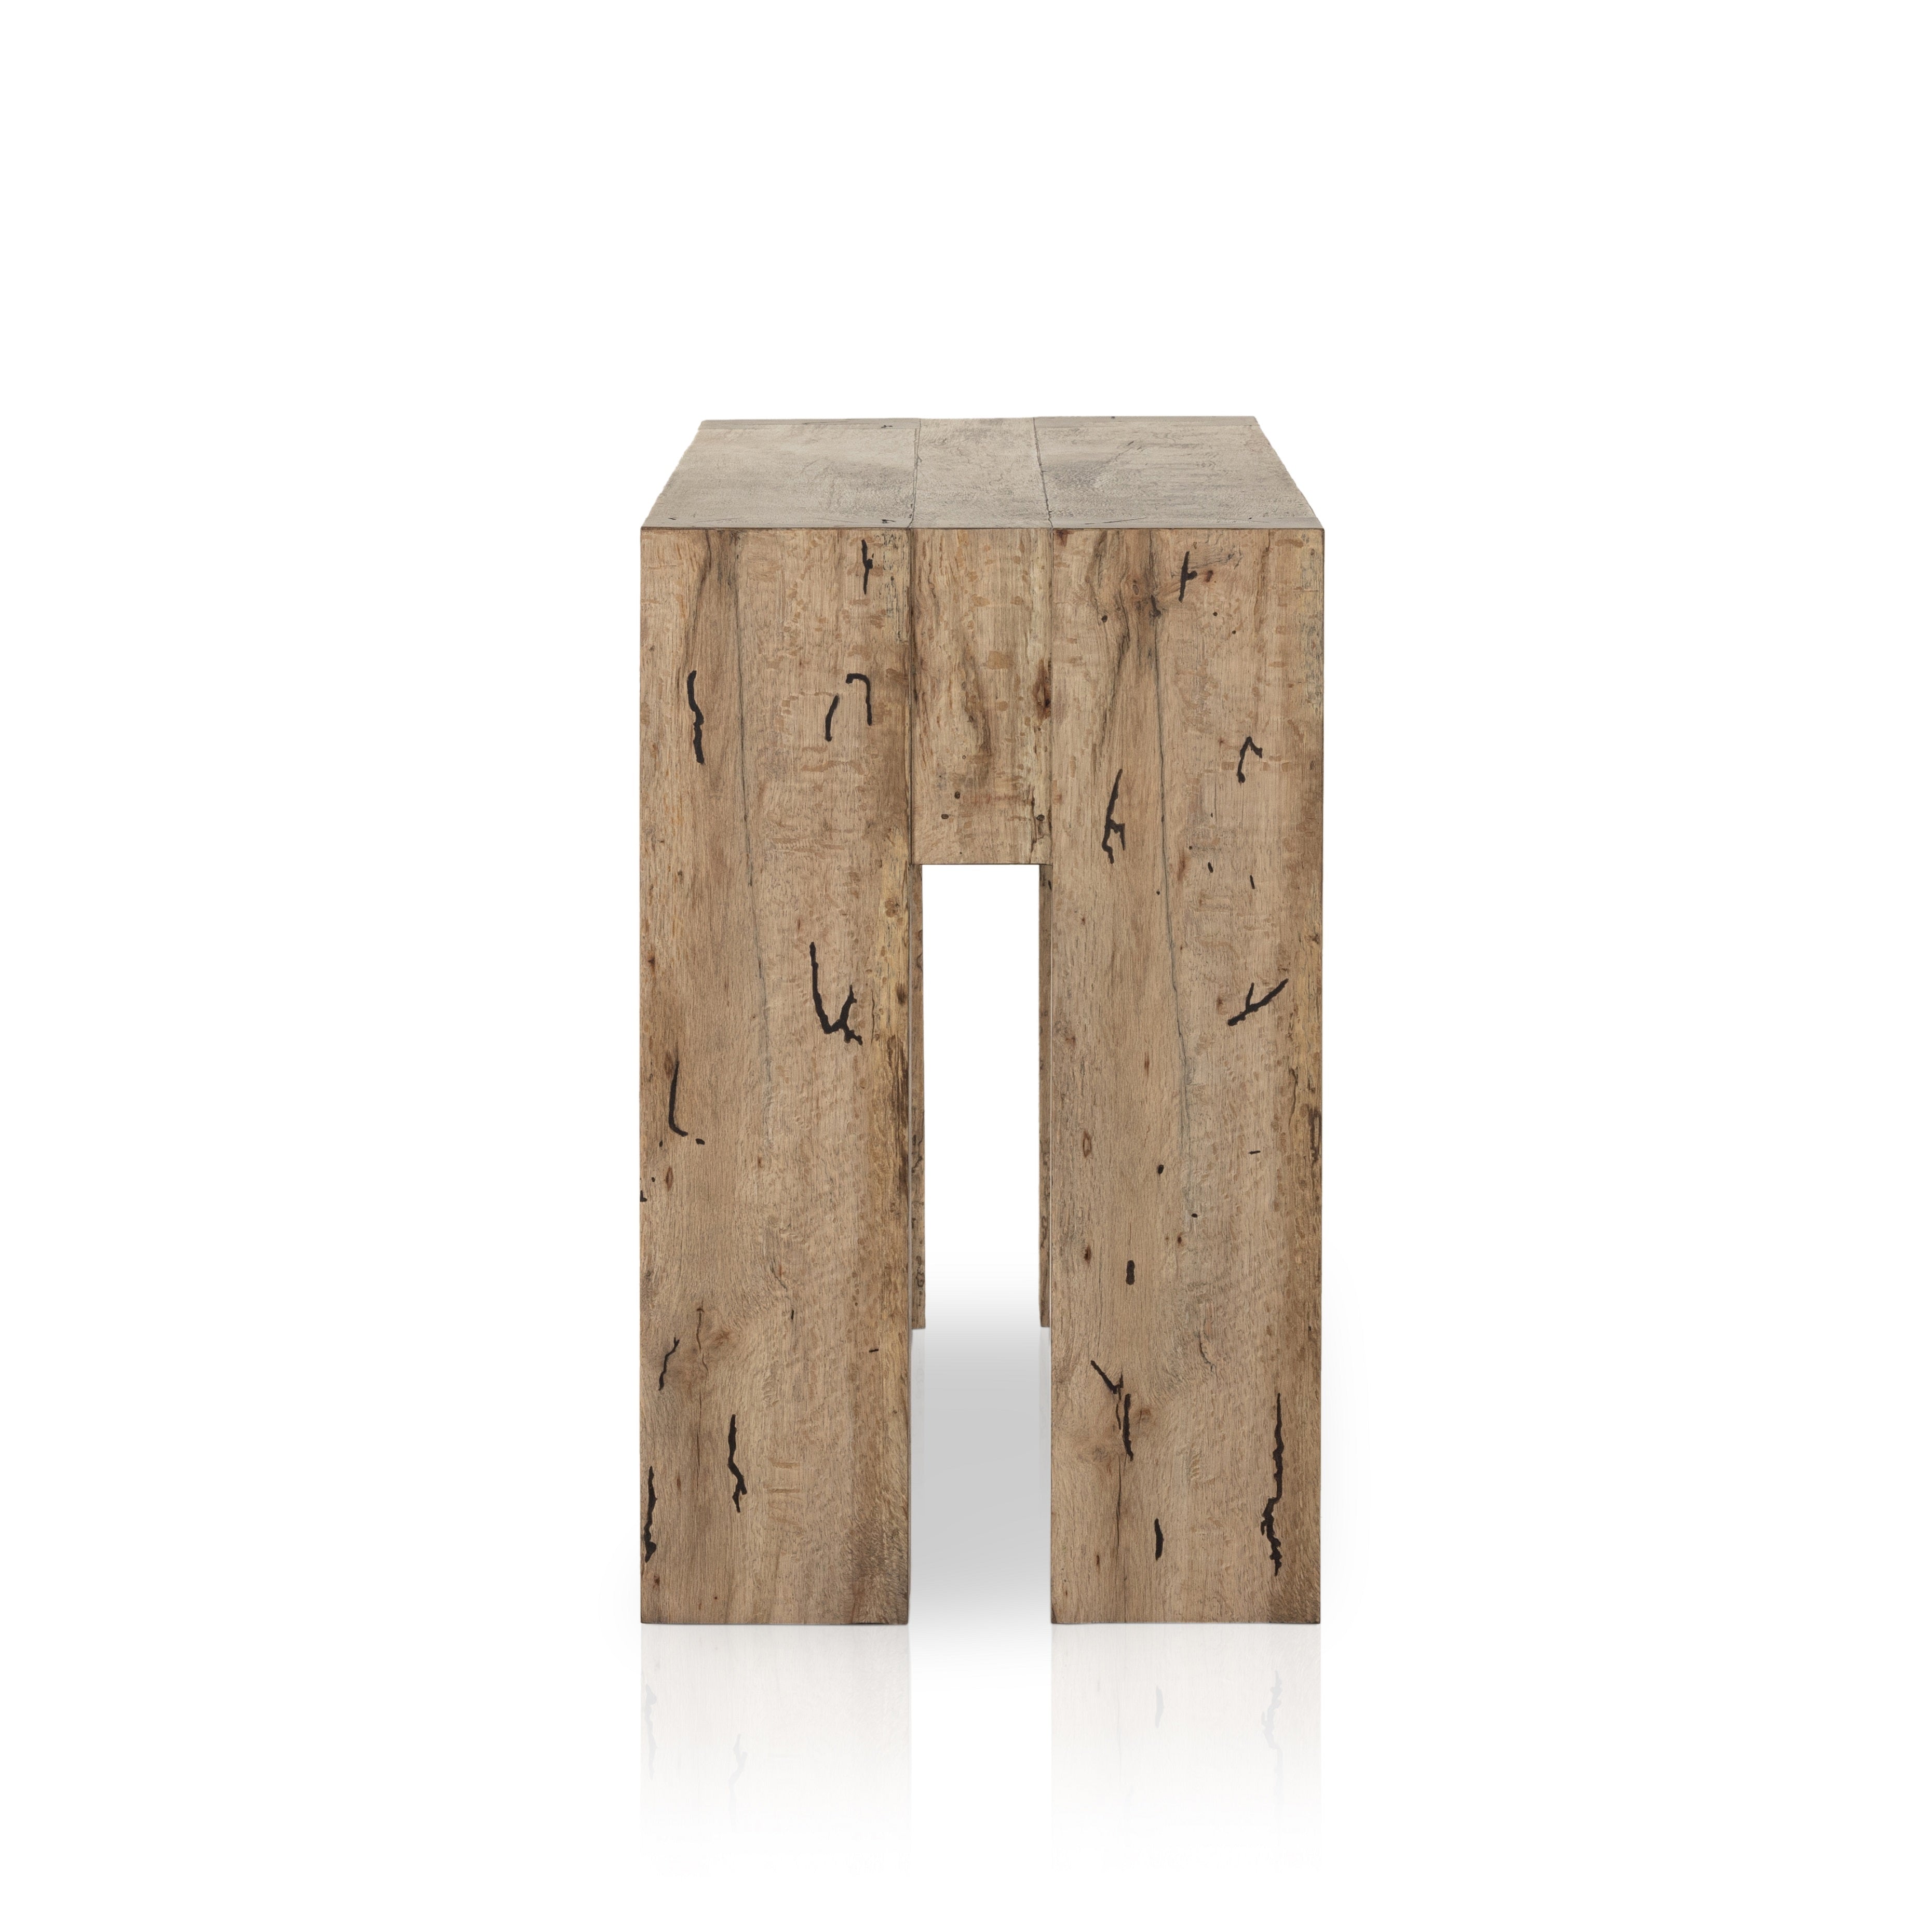 Made from thick-cut oak veneer with a faux rustic finish made to emulate wormwood, this Abaso Rustic Wormwood Oak Console Table features chunky squared legs and dovetail joinery detailing. Amethyst Home provides interior design services, furniture, rugs, and lighting in the Seattle metro area.